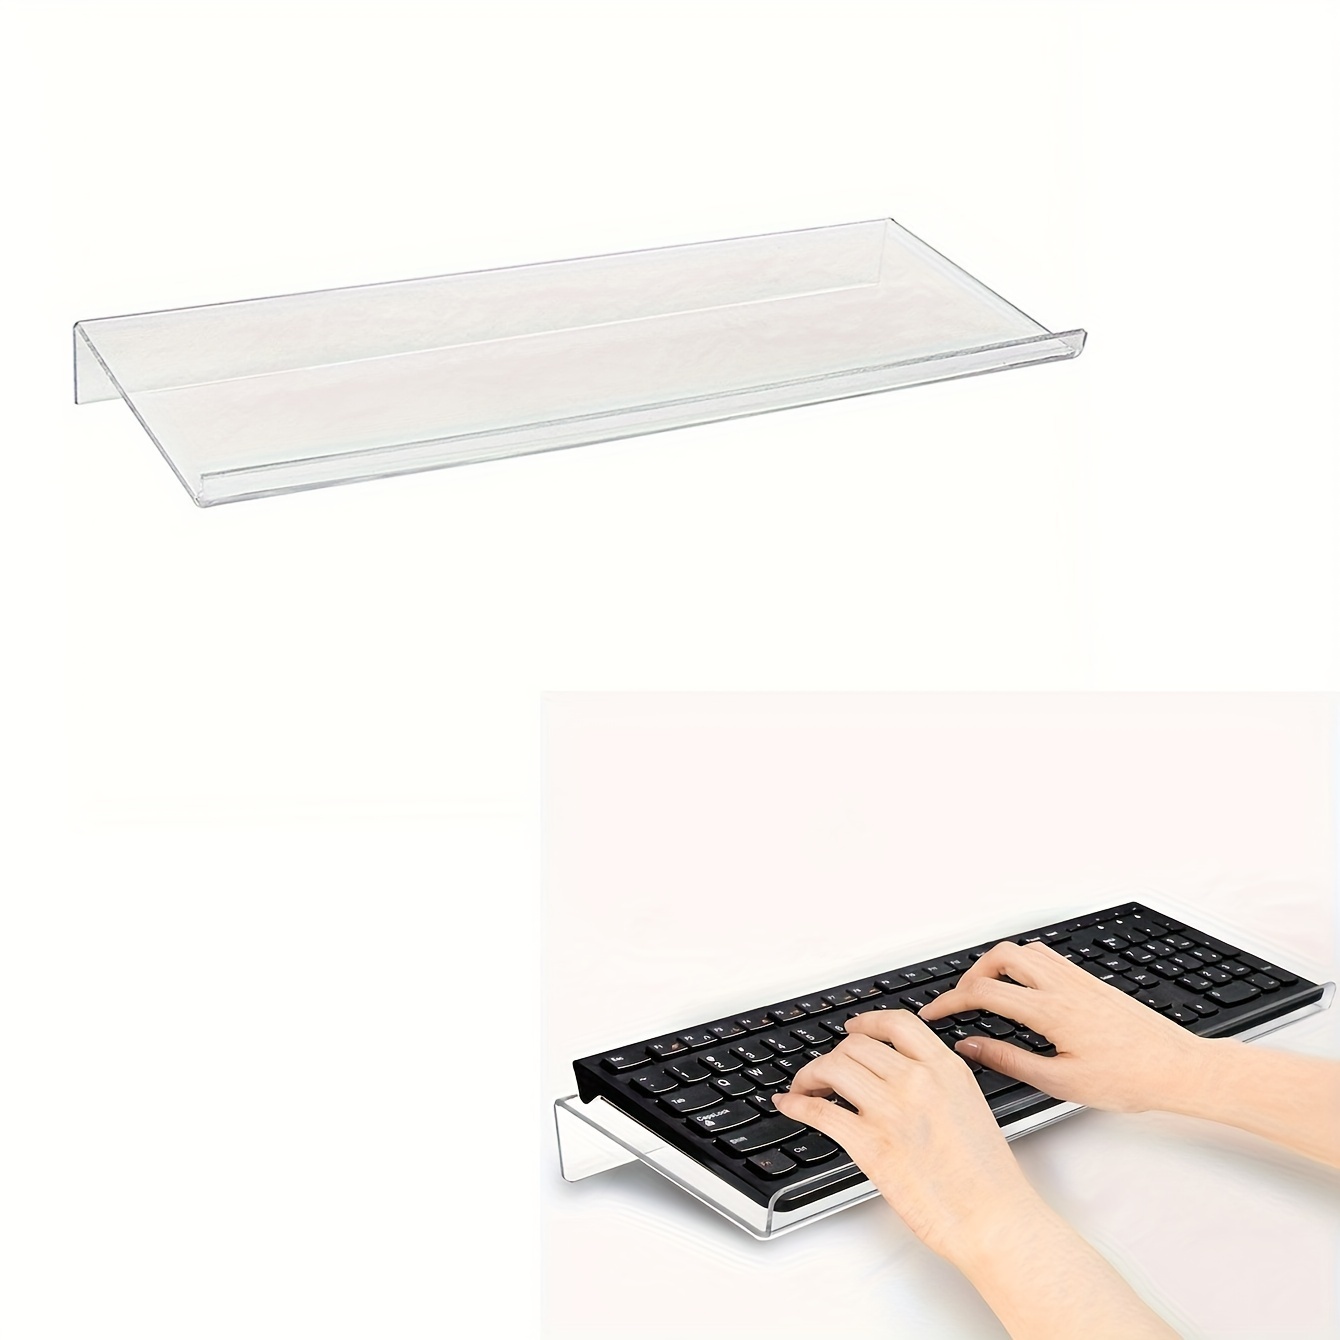 

Durable Transparent Keyboard Stand, Adjustable Tilt Tabletop Keyboard Tray, High-toughness Pet Material, Desk Keyboard Elevator For Home, Office, And School